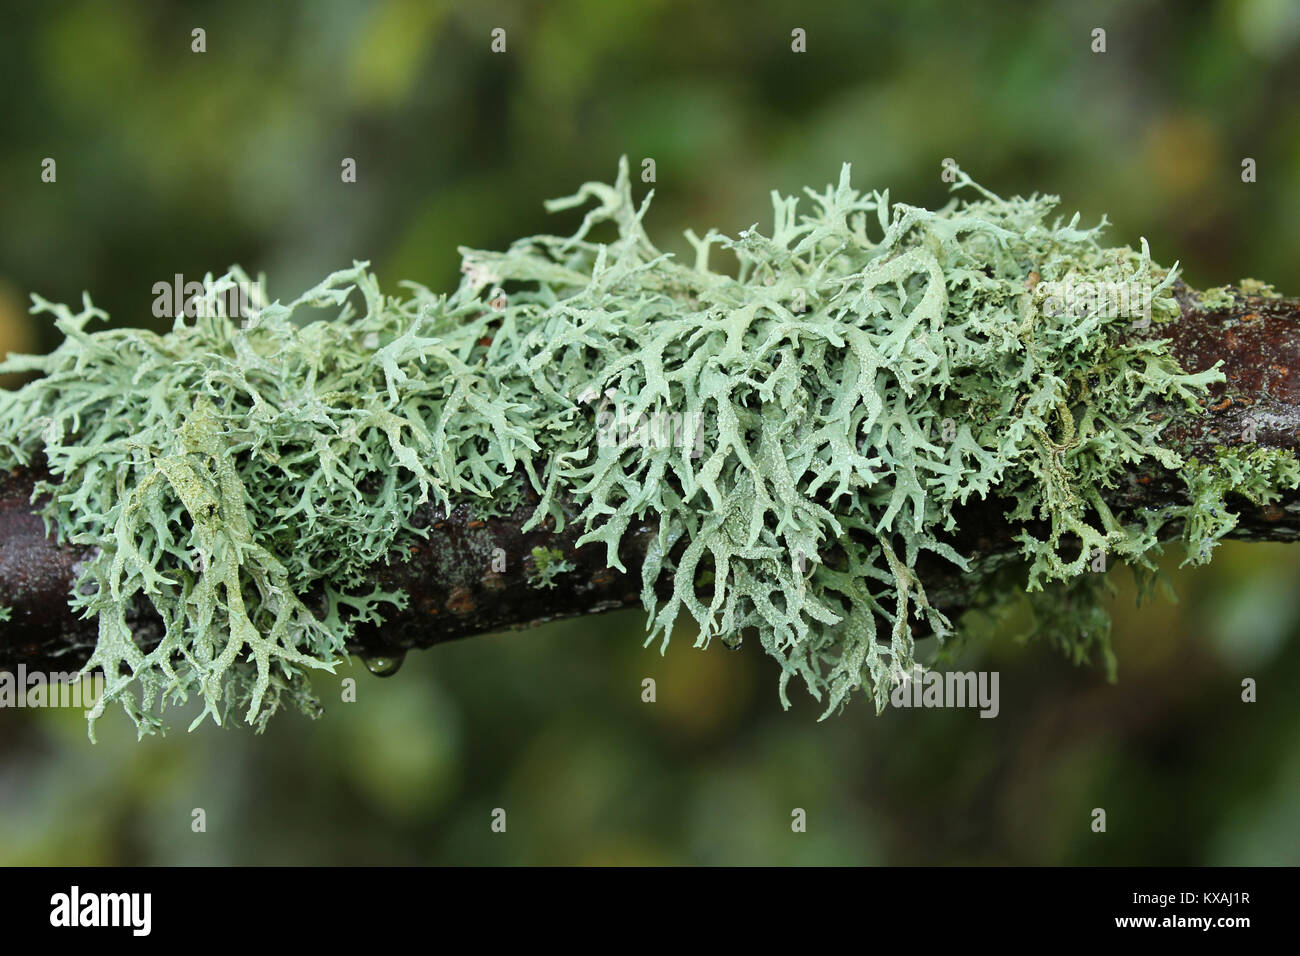 Iceland moss (Cetraria islandica) at the branch, Southern Sweden, Sweden Stock Photo